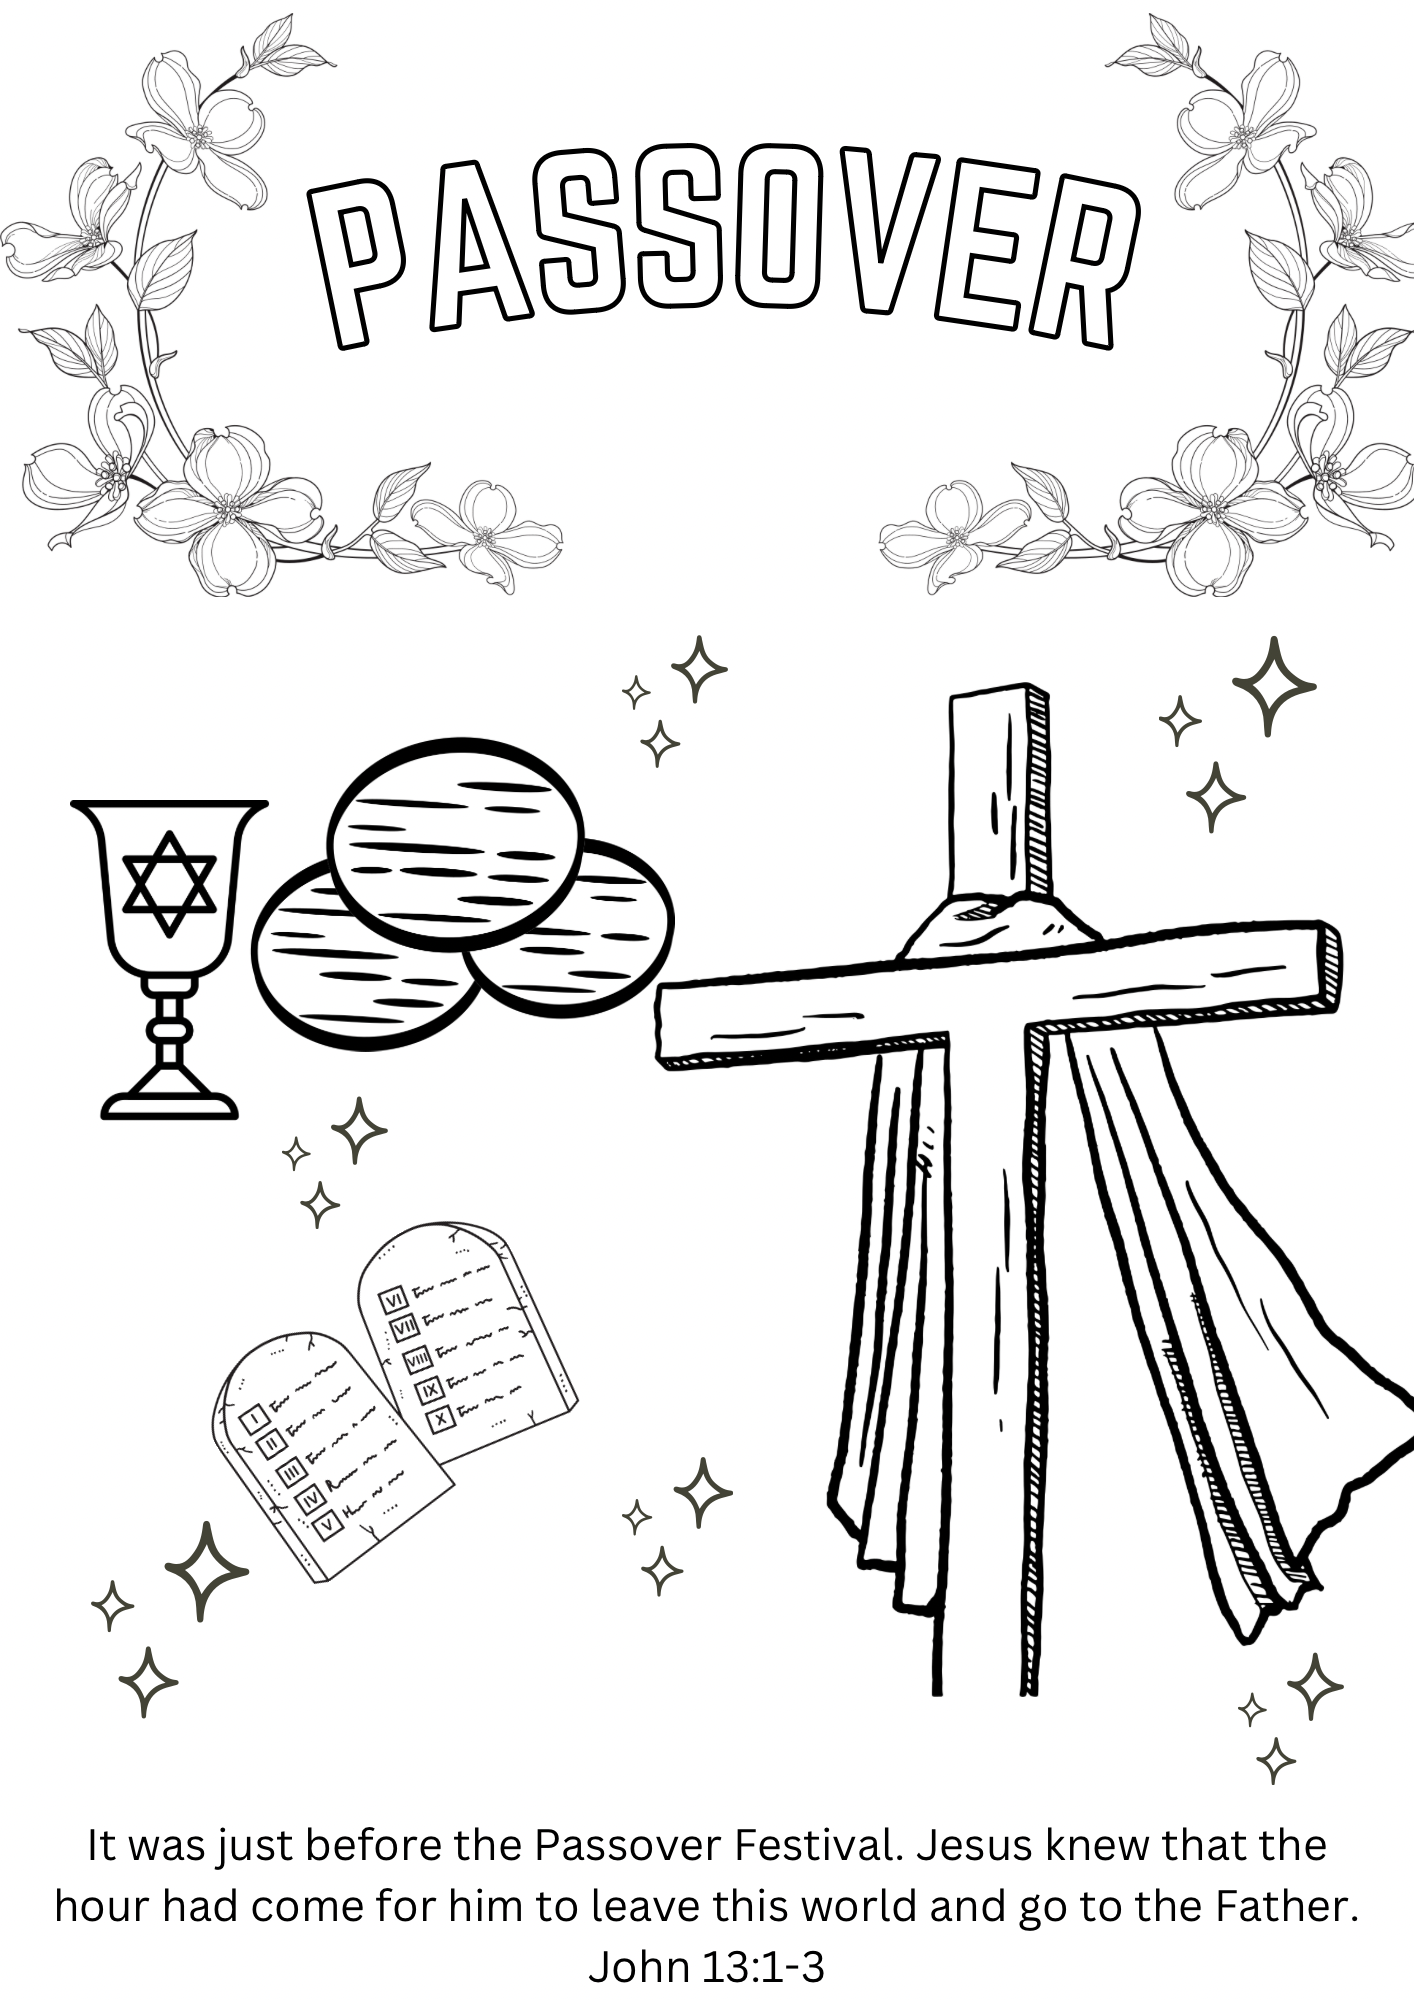 FREE Passover Coloring Page